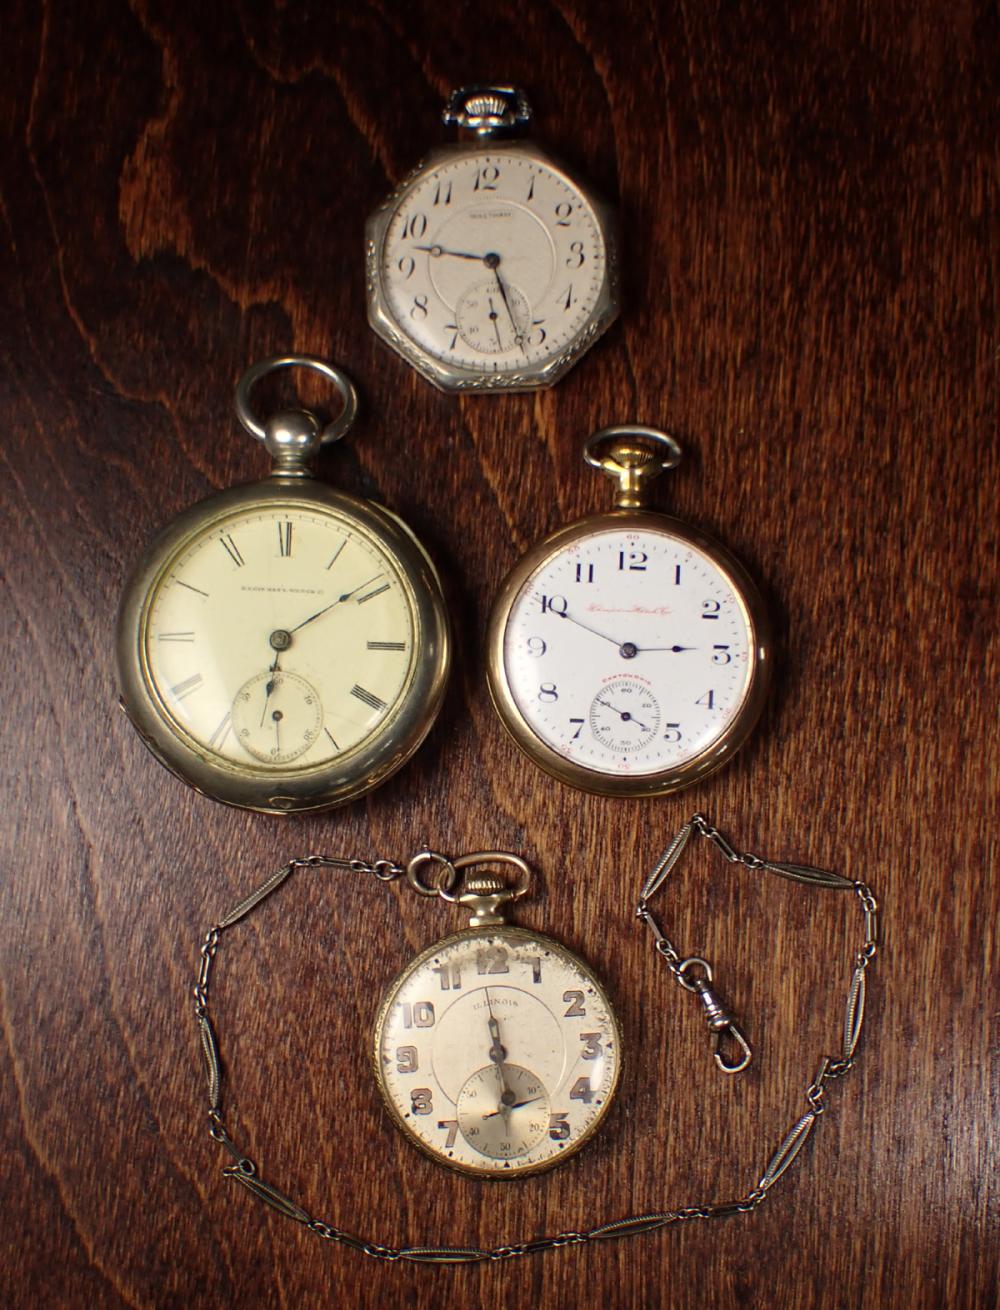 FOUR OPEN FACE POCKET WATCHES: